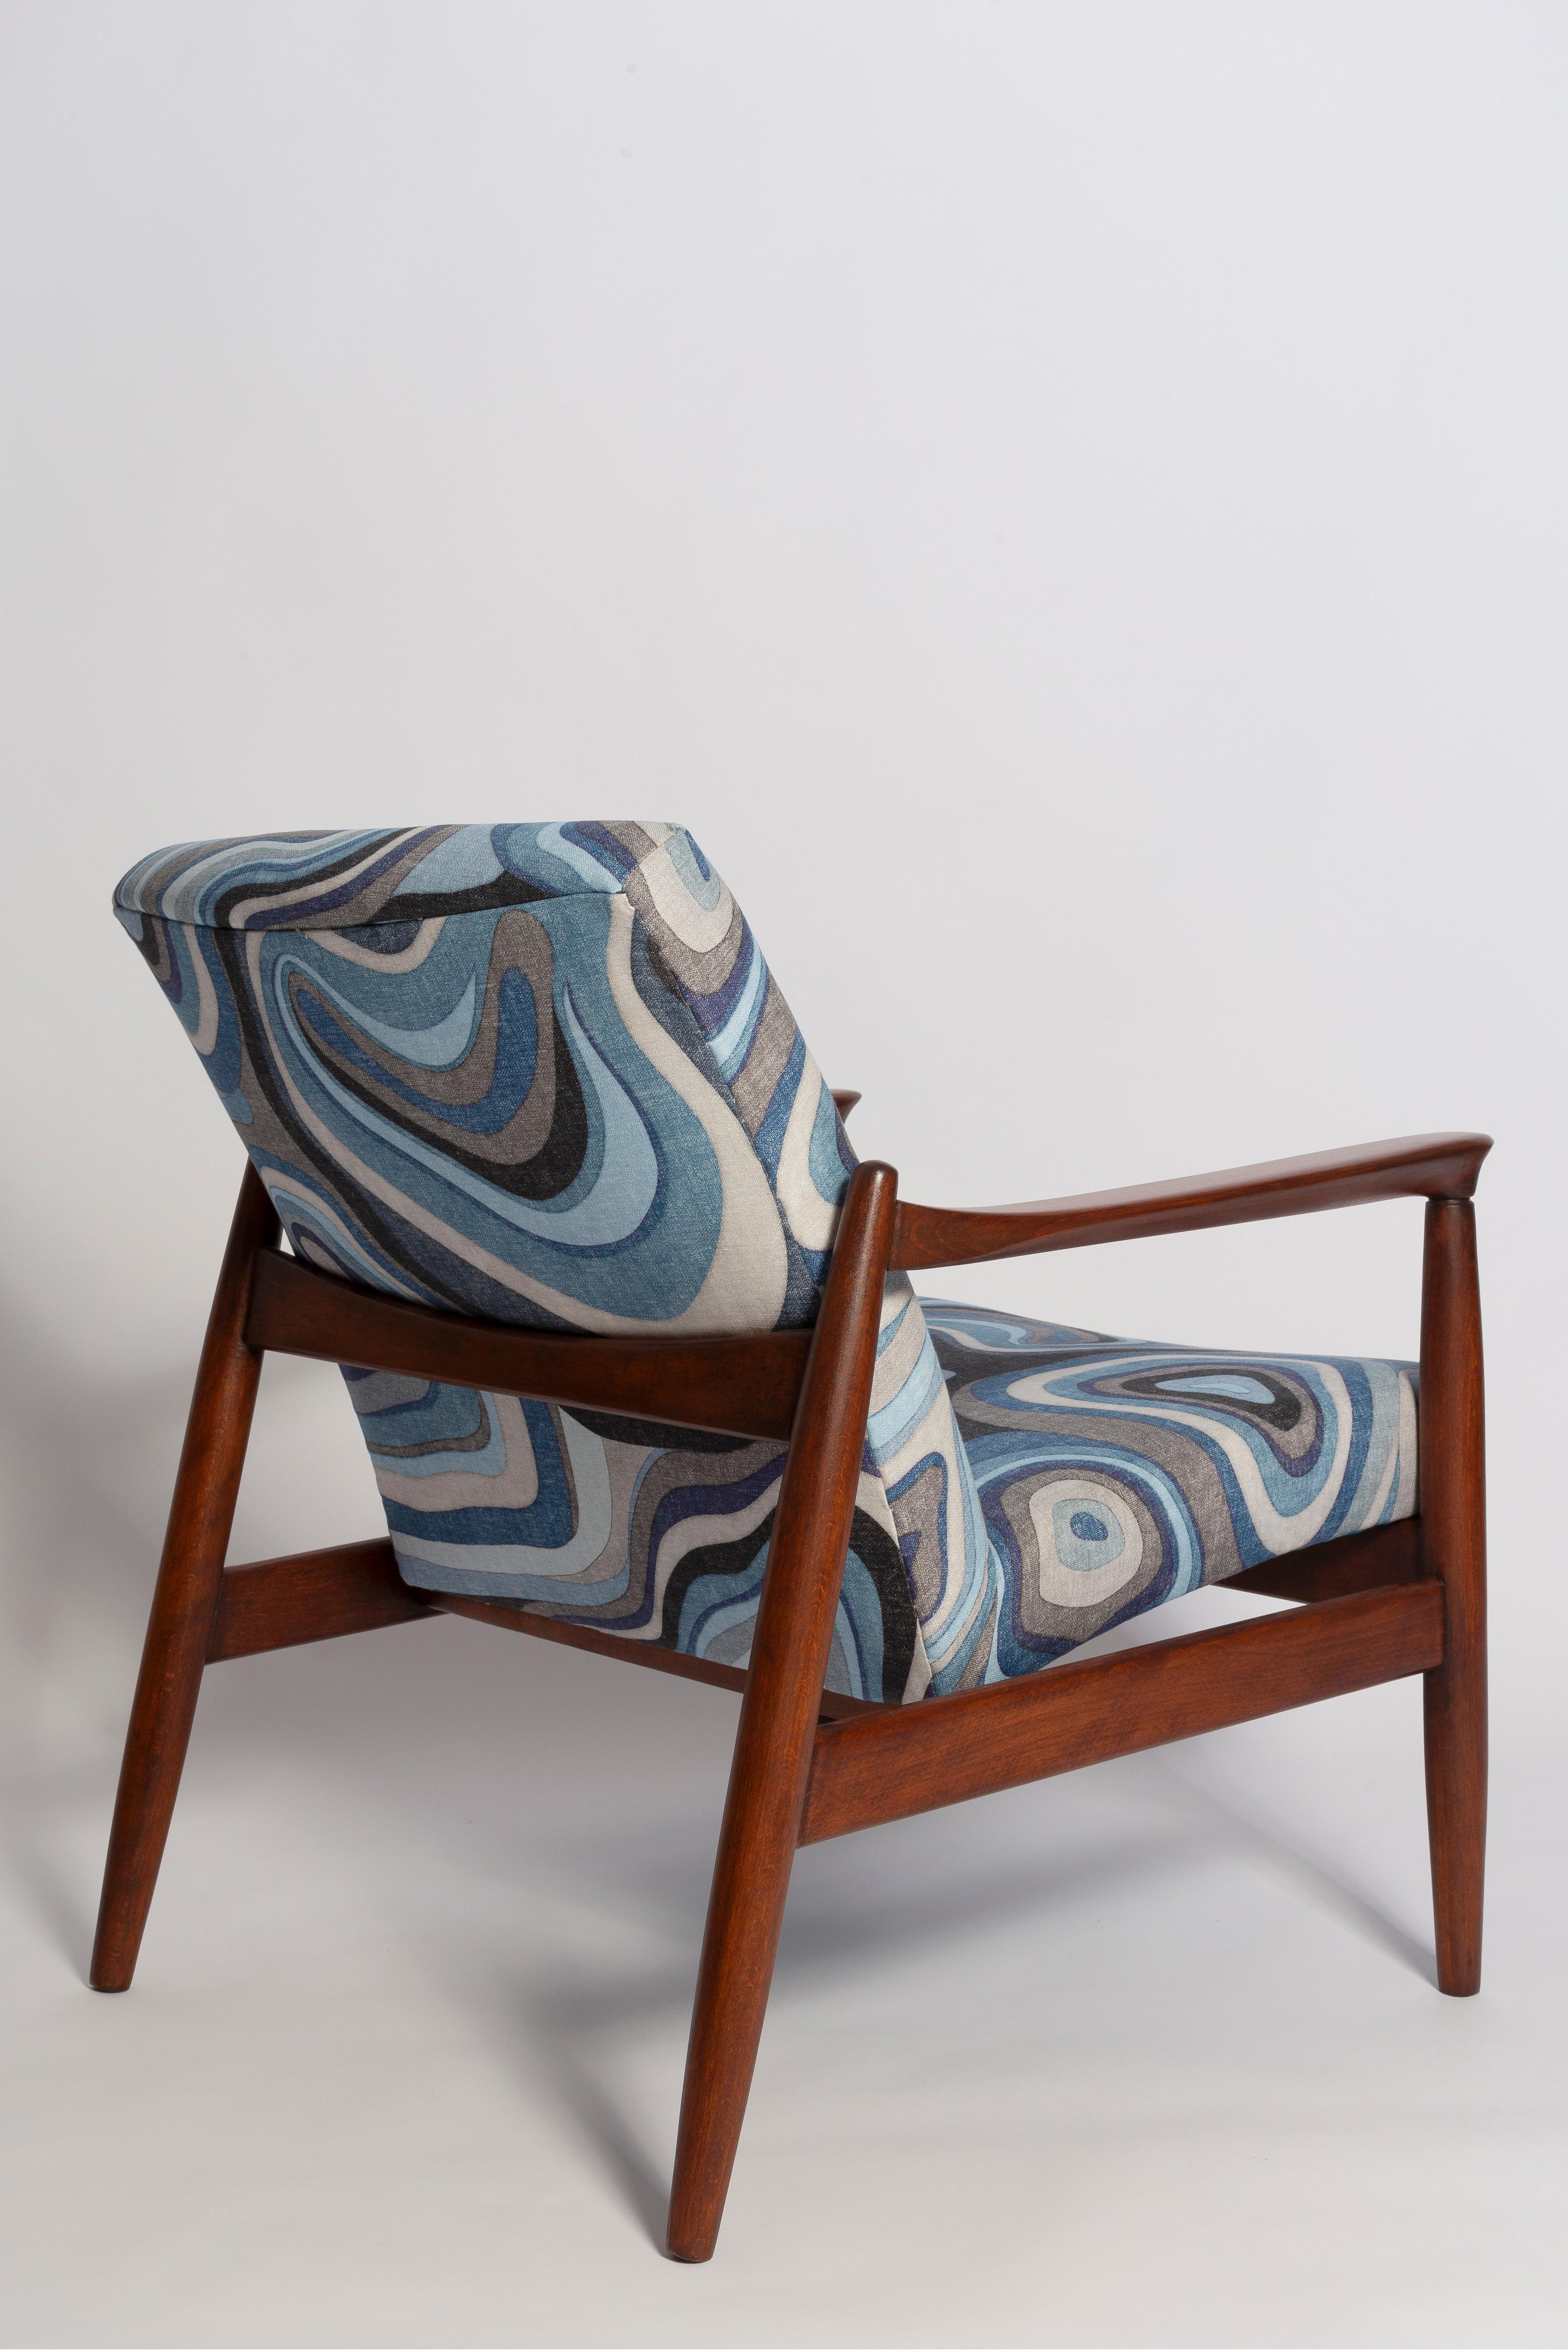 Textile Set of Blue Linen Mid Century GFM64 Armchair and Stool, E Homa, Europe, 1960s For Sale